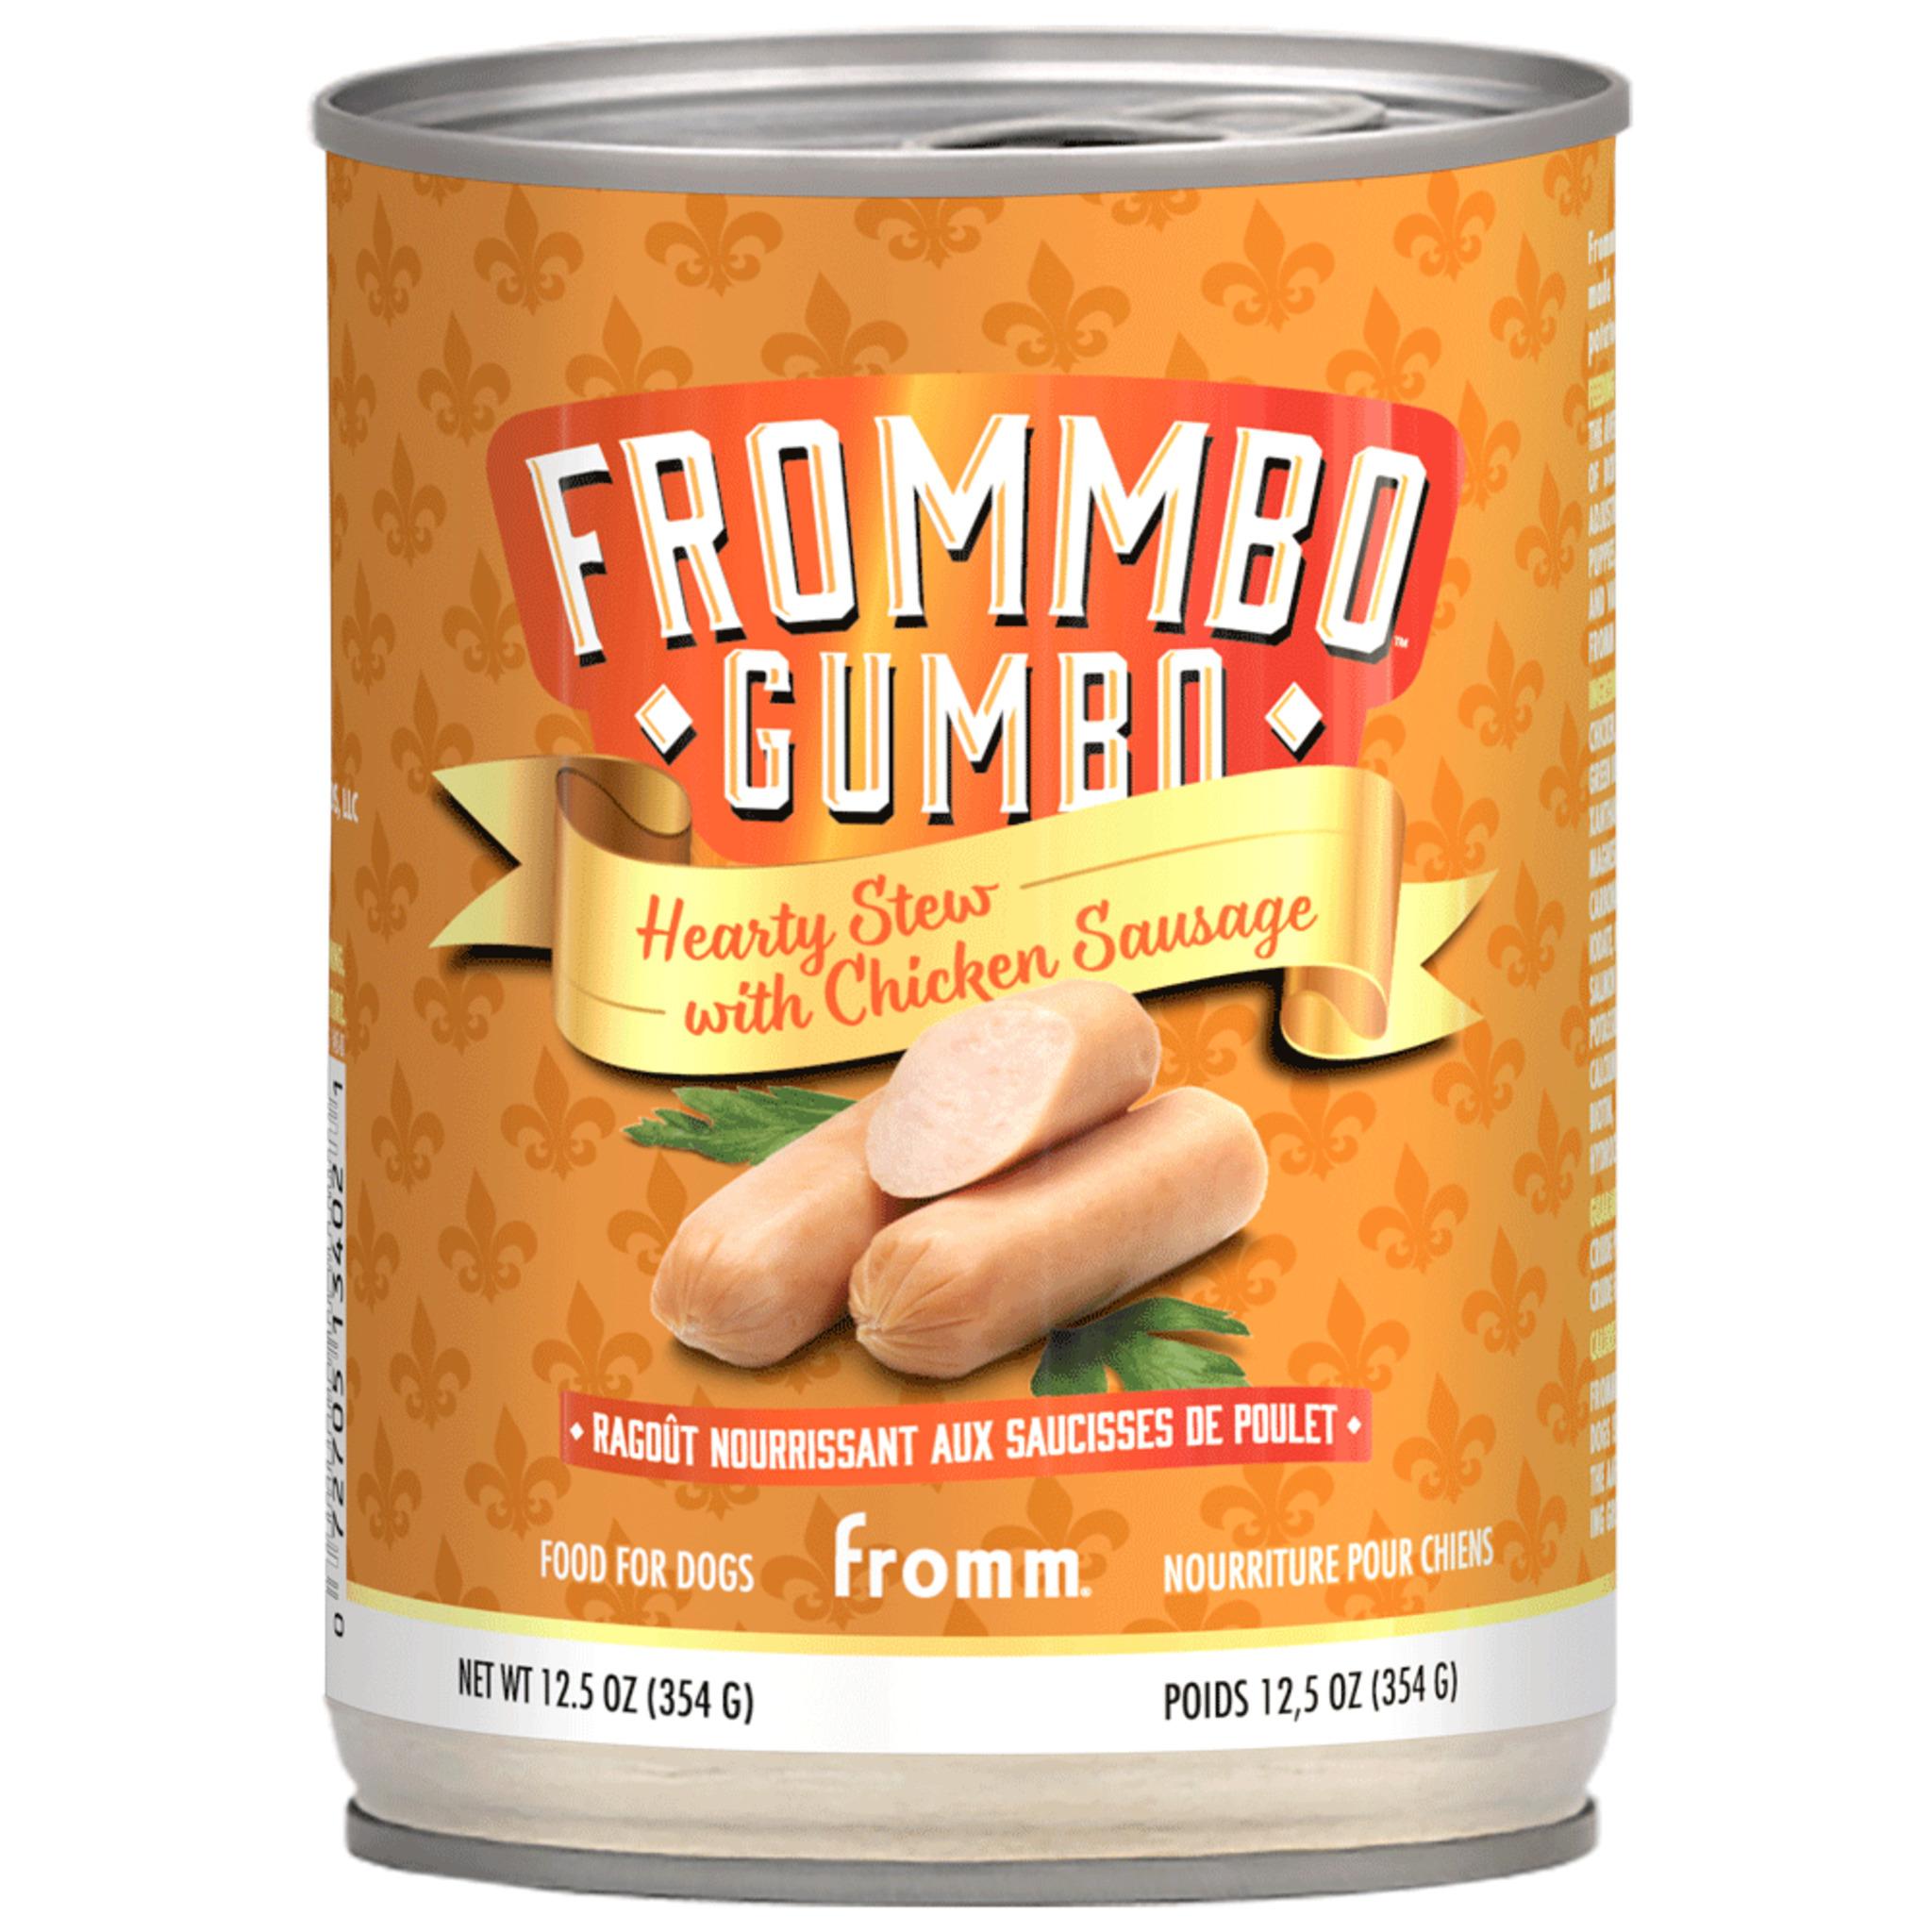 Fromm Frommbo Gumbo Chicken Sausage Stew Dog Food 12.5 oz